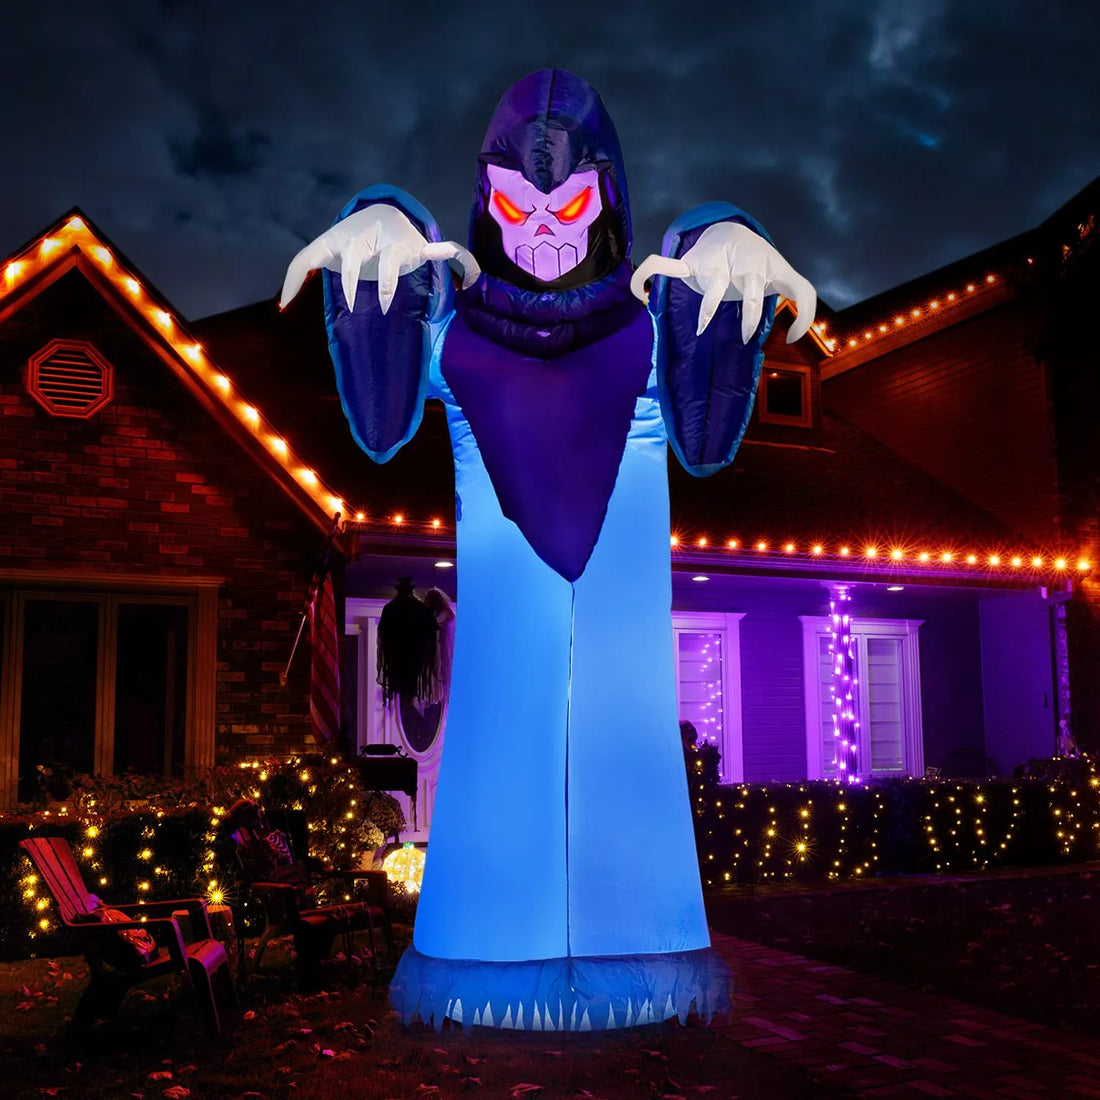 What Makes a Good Inflatable Halloween Decoration?